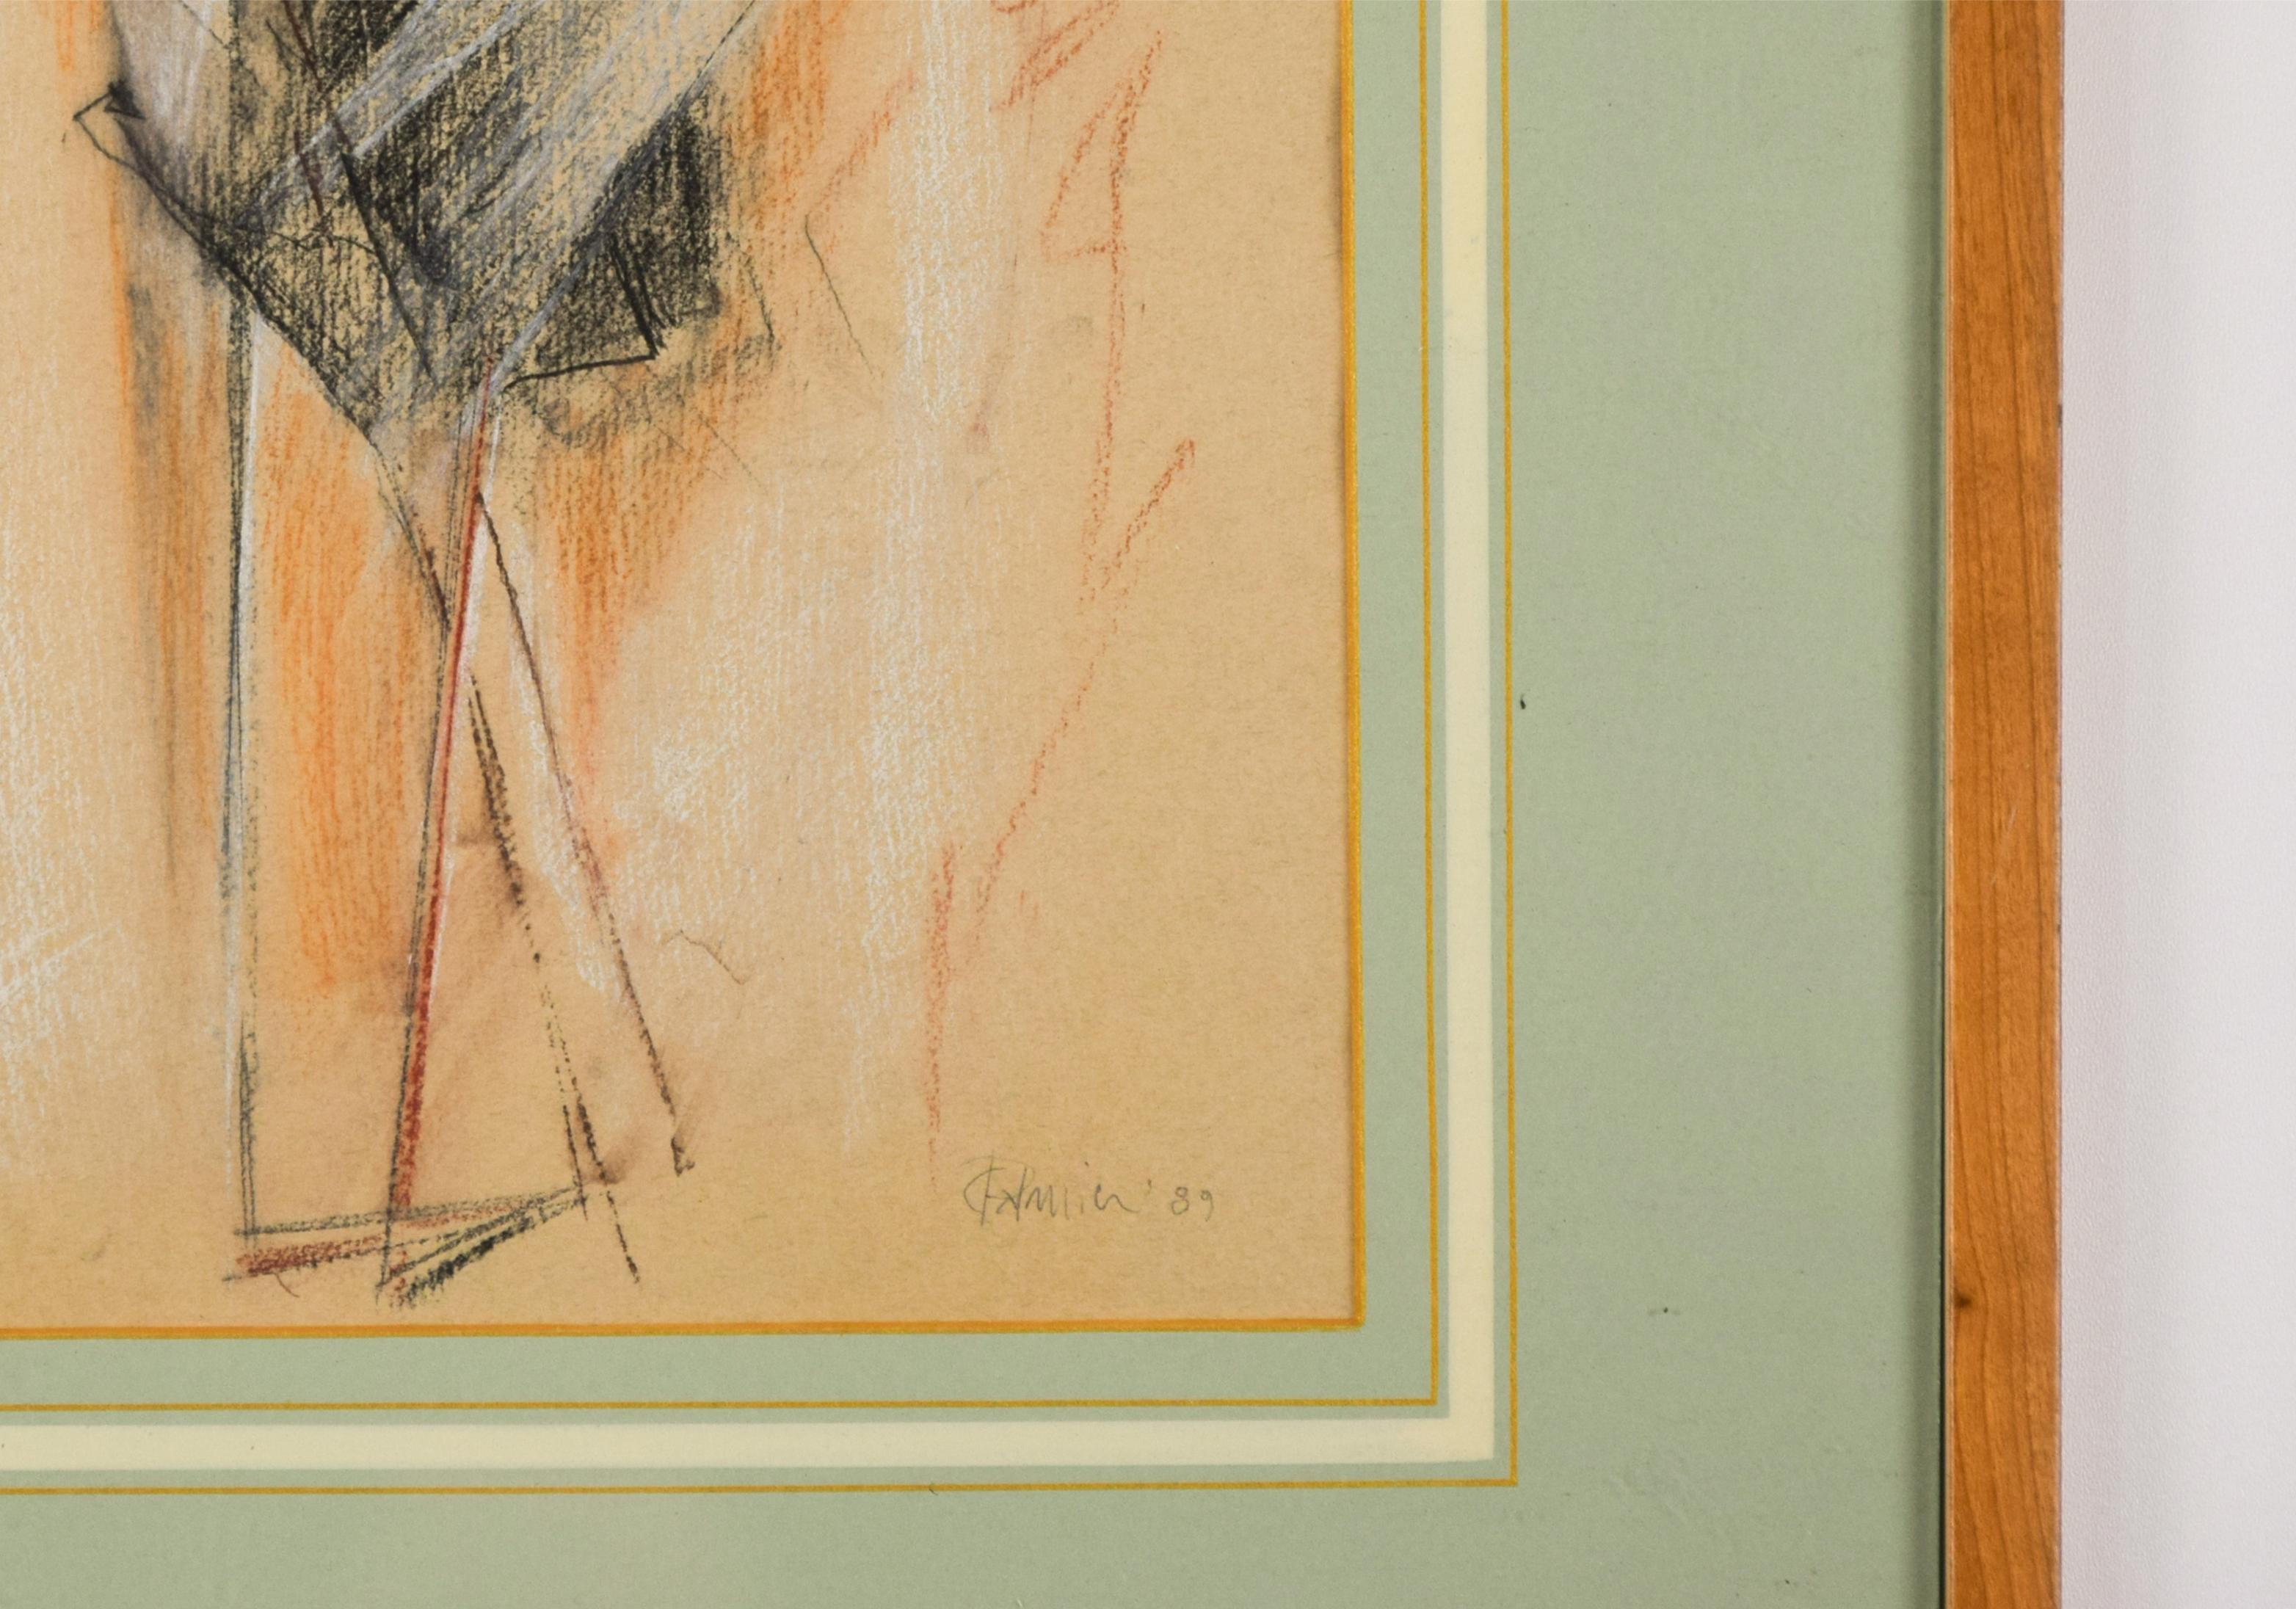 Abstract Composition is an original contemporary artwork realized by Claudio Palmieri in 1989.

Mixed colored pastel on paper. Hand-signed and dated by the artist on the lower right margin.

Very good conditions. Includes frame: 52 x 1.5 x 42